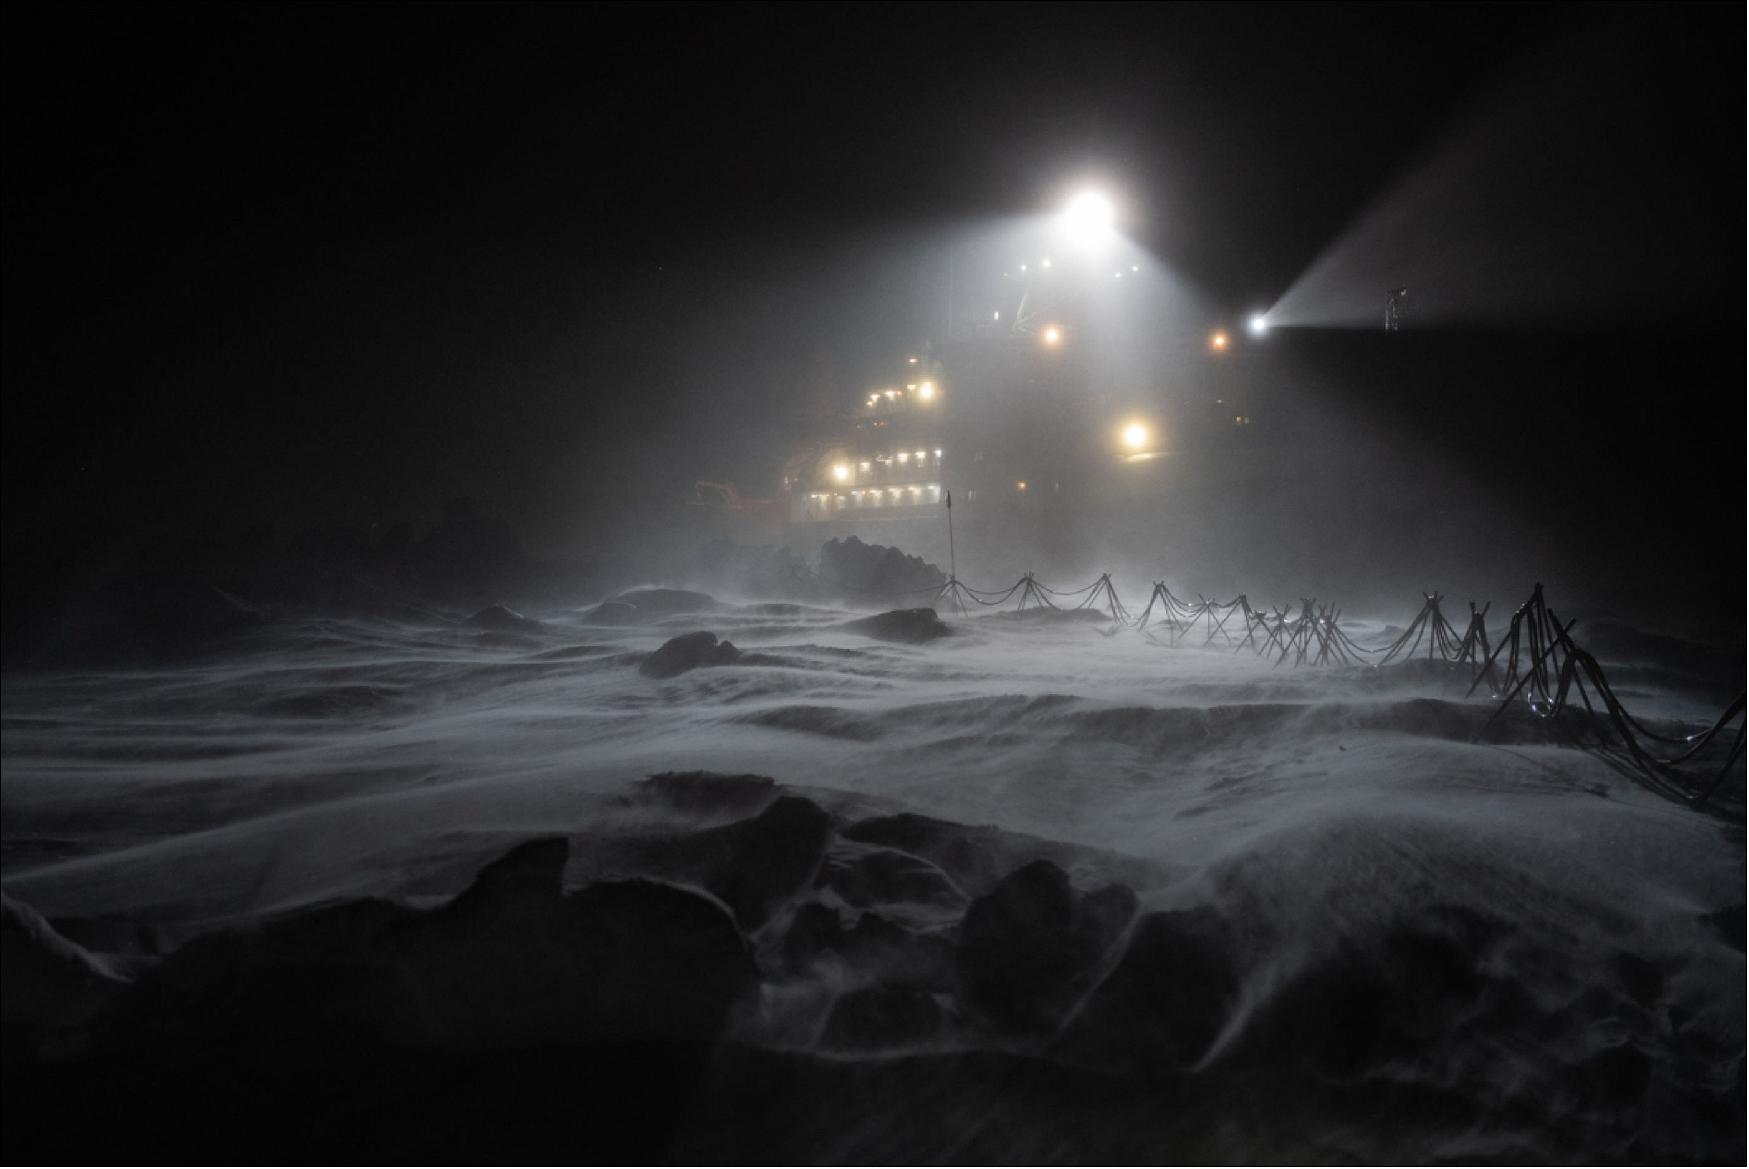 Figure 46: Polarstern shrouded in darkness. The MOSAiC expedition of AWI will make a major contribution to Arctic climate science. During the polar winter, researchers are subjected to temperatures as low as –45°C and the perpetual darkness (image credit: Alfred-Wegener-Institute/Esther Horvath , CC BY-SA 3.0 IGO)